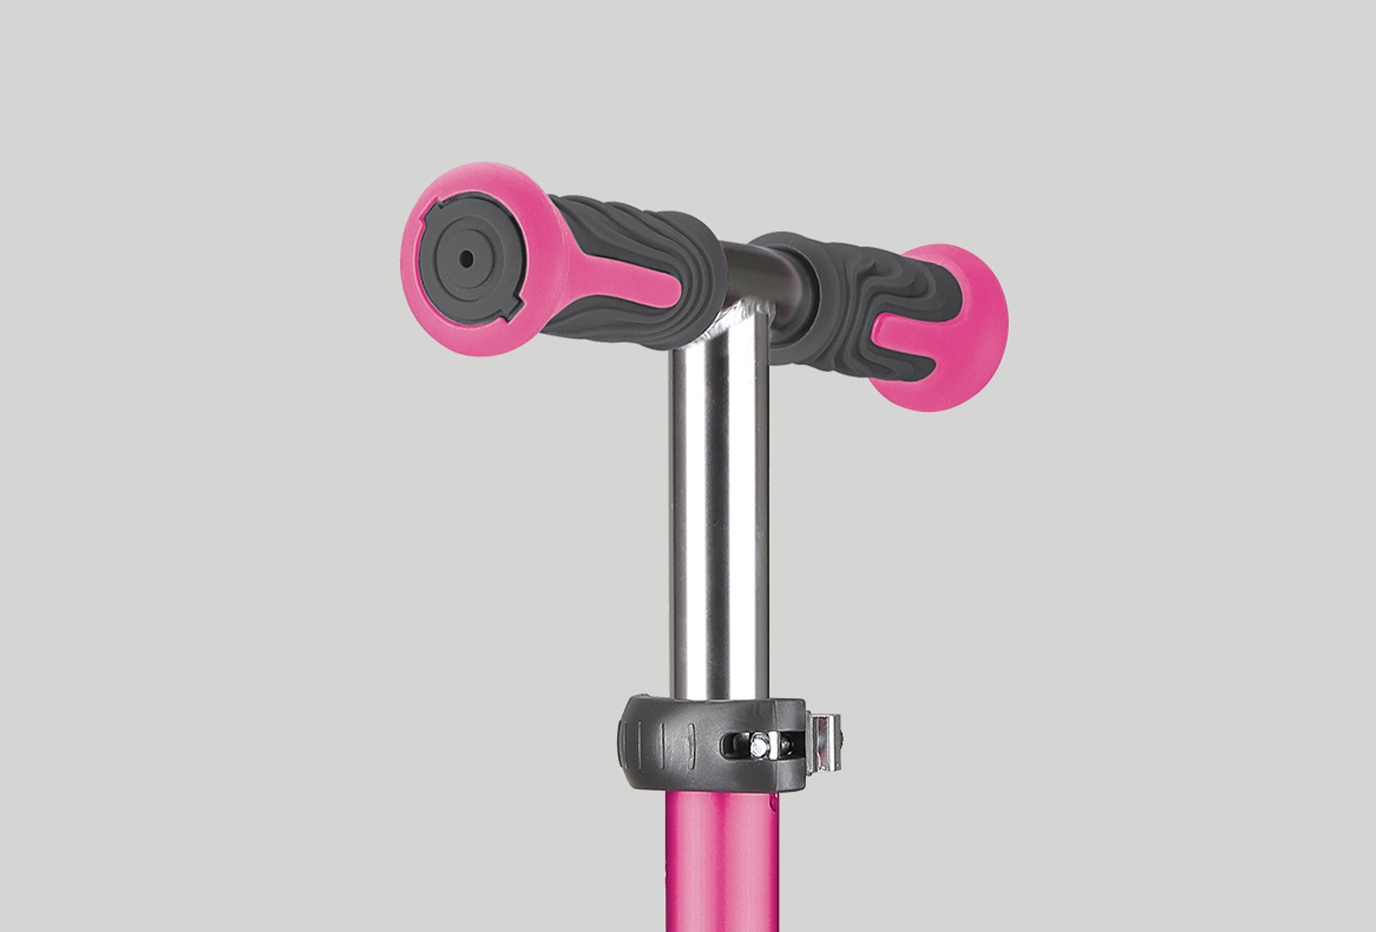 New scooter T-bar grips design and colours